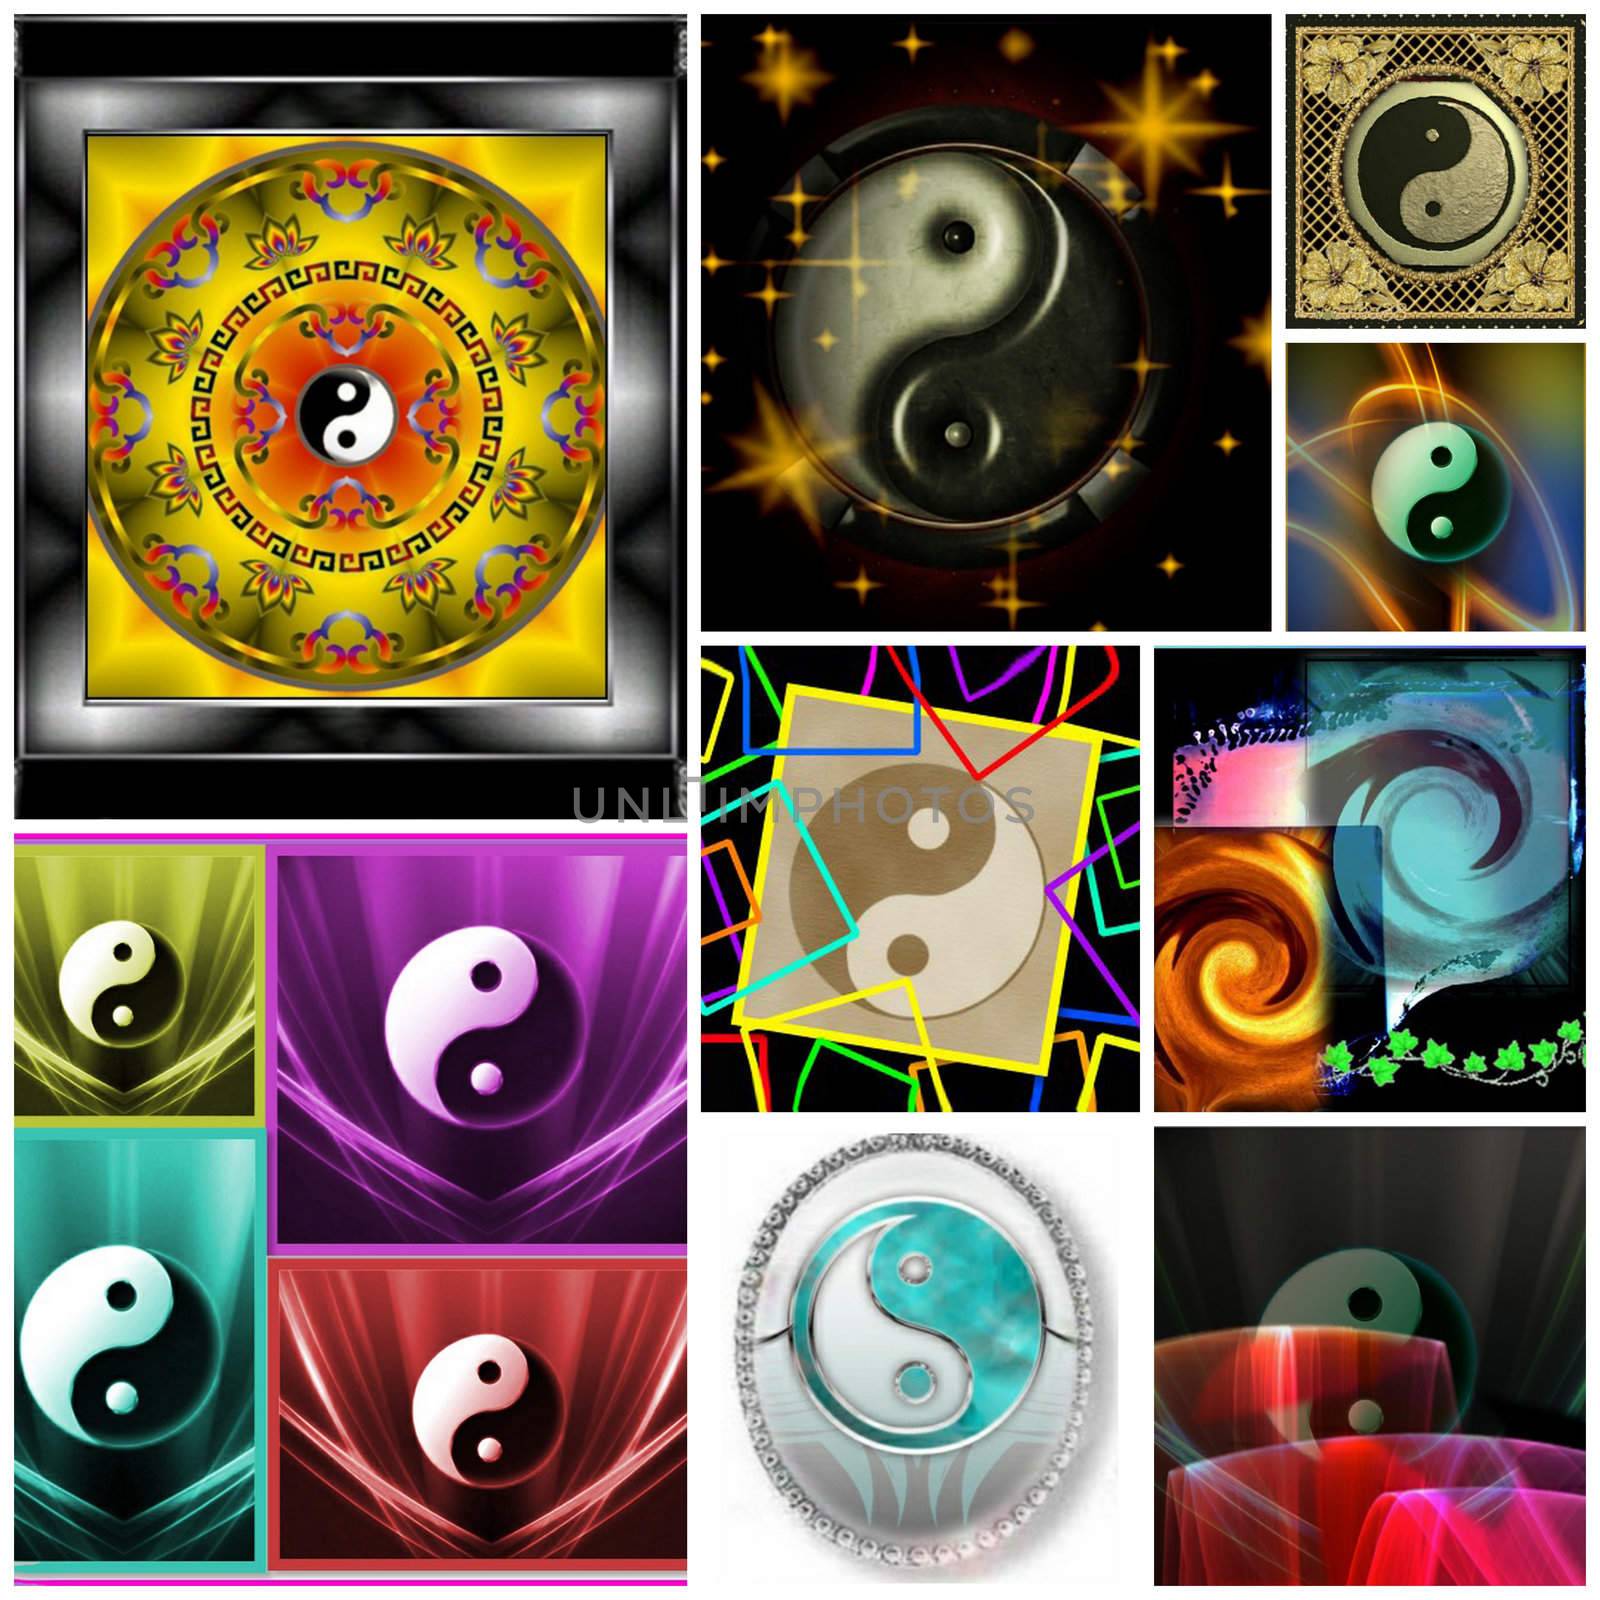 Ying Yang Glossy Colorful Style Collage by Baltus